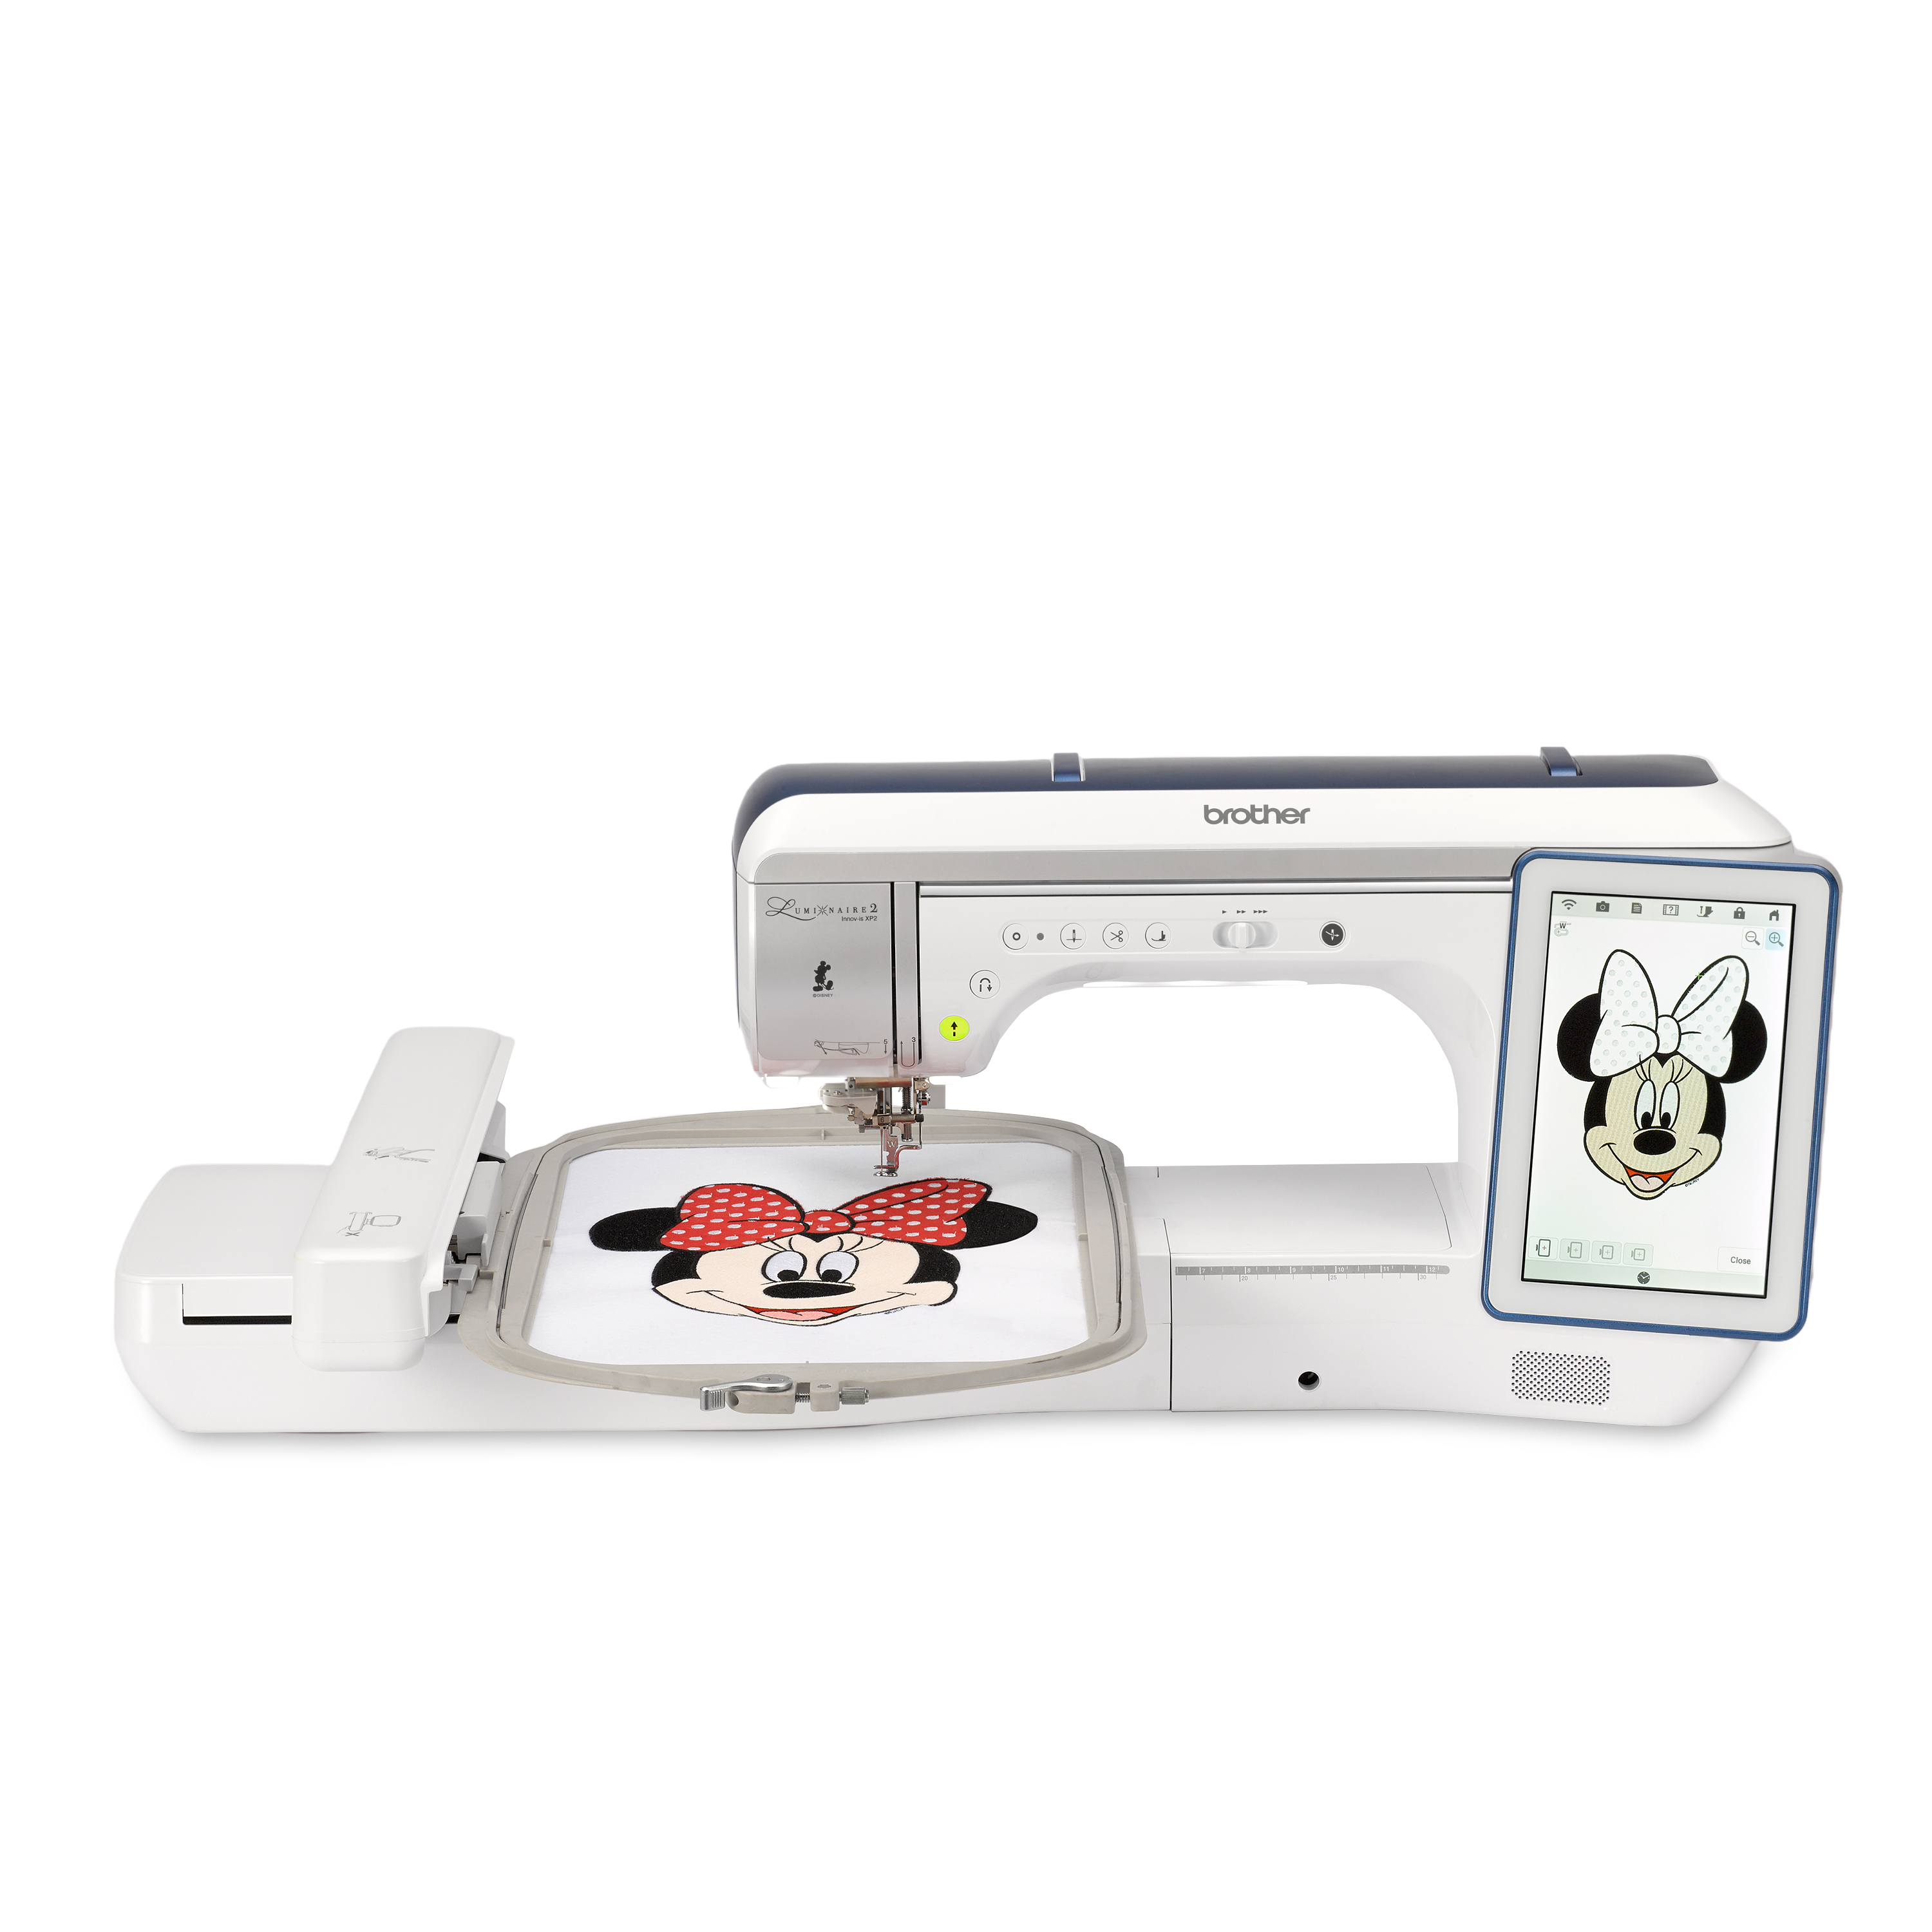 New User Interface Brother Embroidery Machine Brother Dream Machine Sewing Machine Embroidery